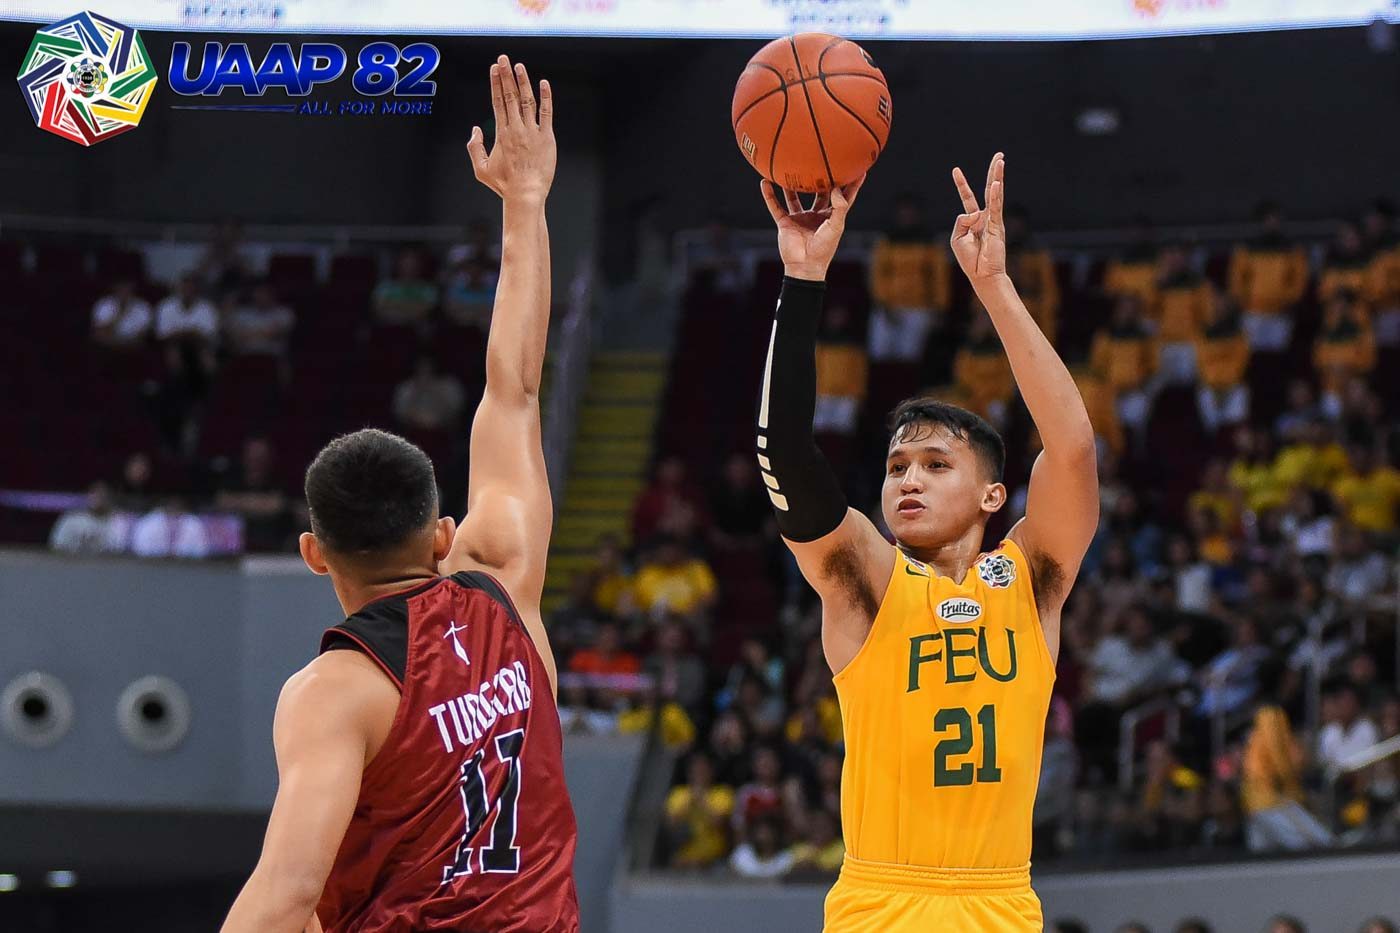 CLUTCH. Wendell Comboy's potential game-winning trey in regulation rims out  but the FEU veteran quickly redeems himself by  scoring 5 points in overtime, including the big fadeaway jumper that puts the Tams up with 18.3 ticks left. Photo release
   